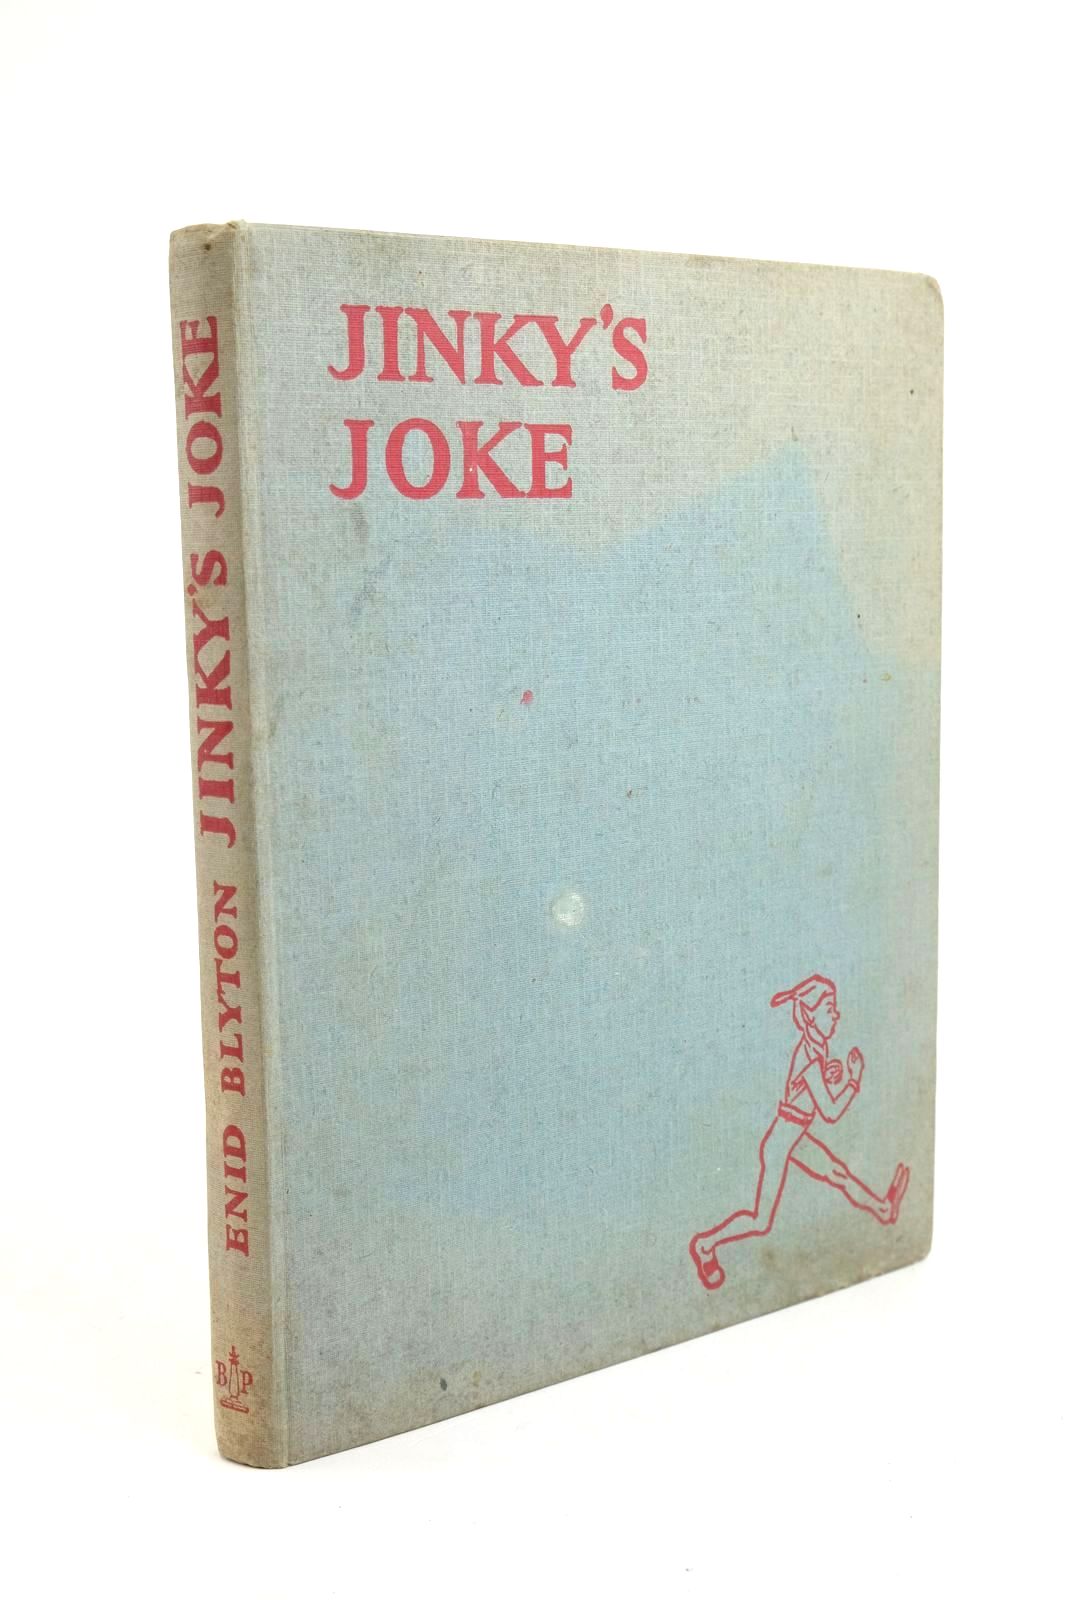 Photo of JINKY'S JOKE AND OTHER STORIES written by Blyton, Enid illustrated by Gell, Kathleen published by Brockhampton Press Ltd. (STOCK CODE: 1321535)  for sale by Stella & Rose's Books